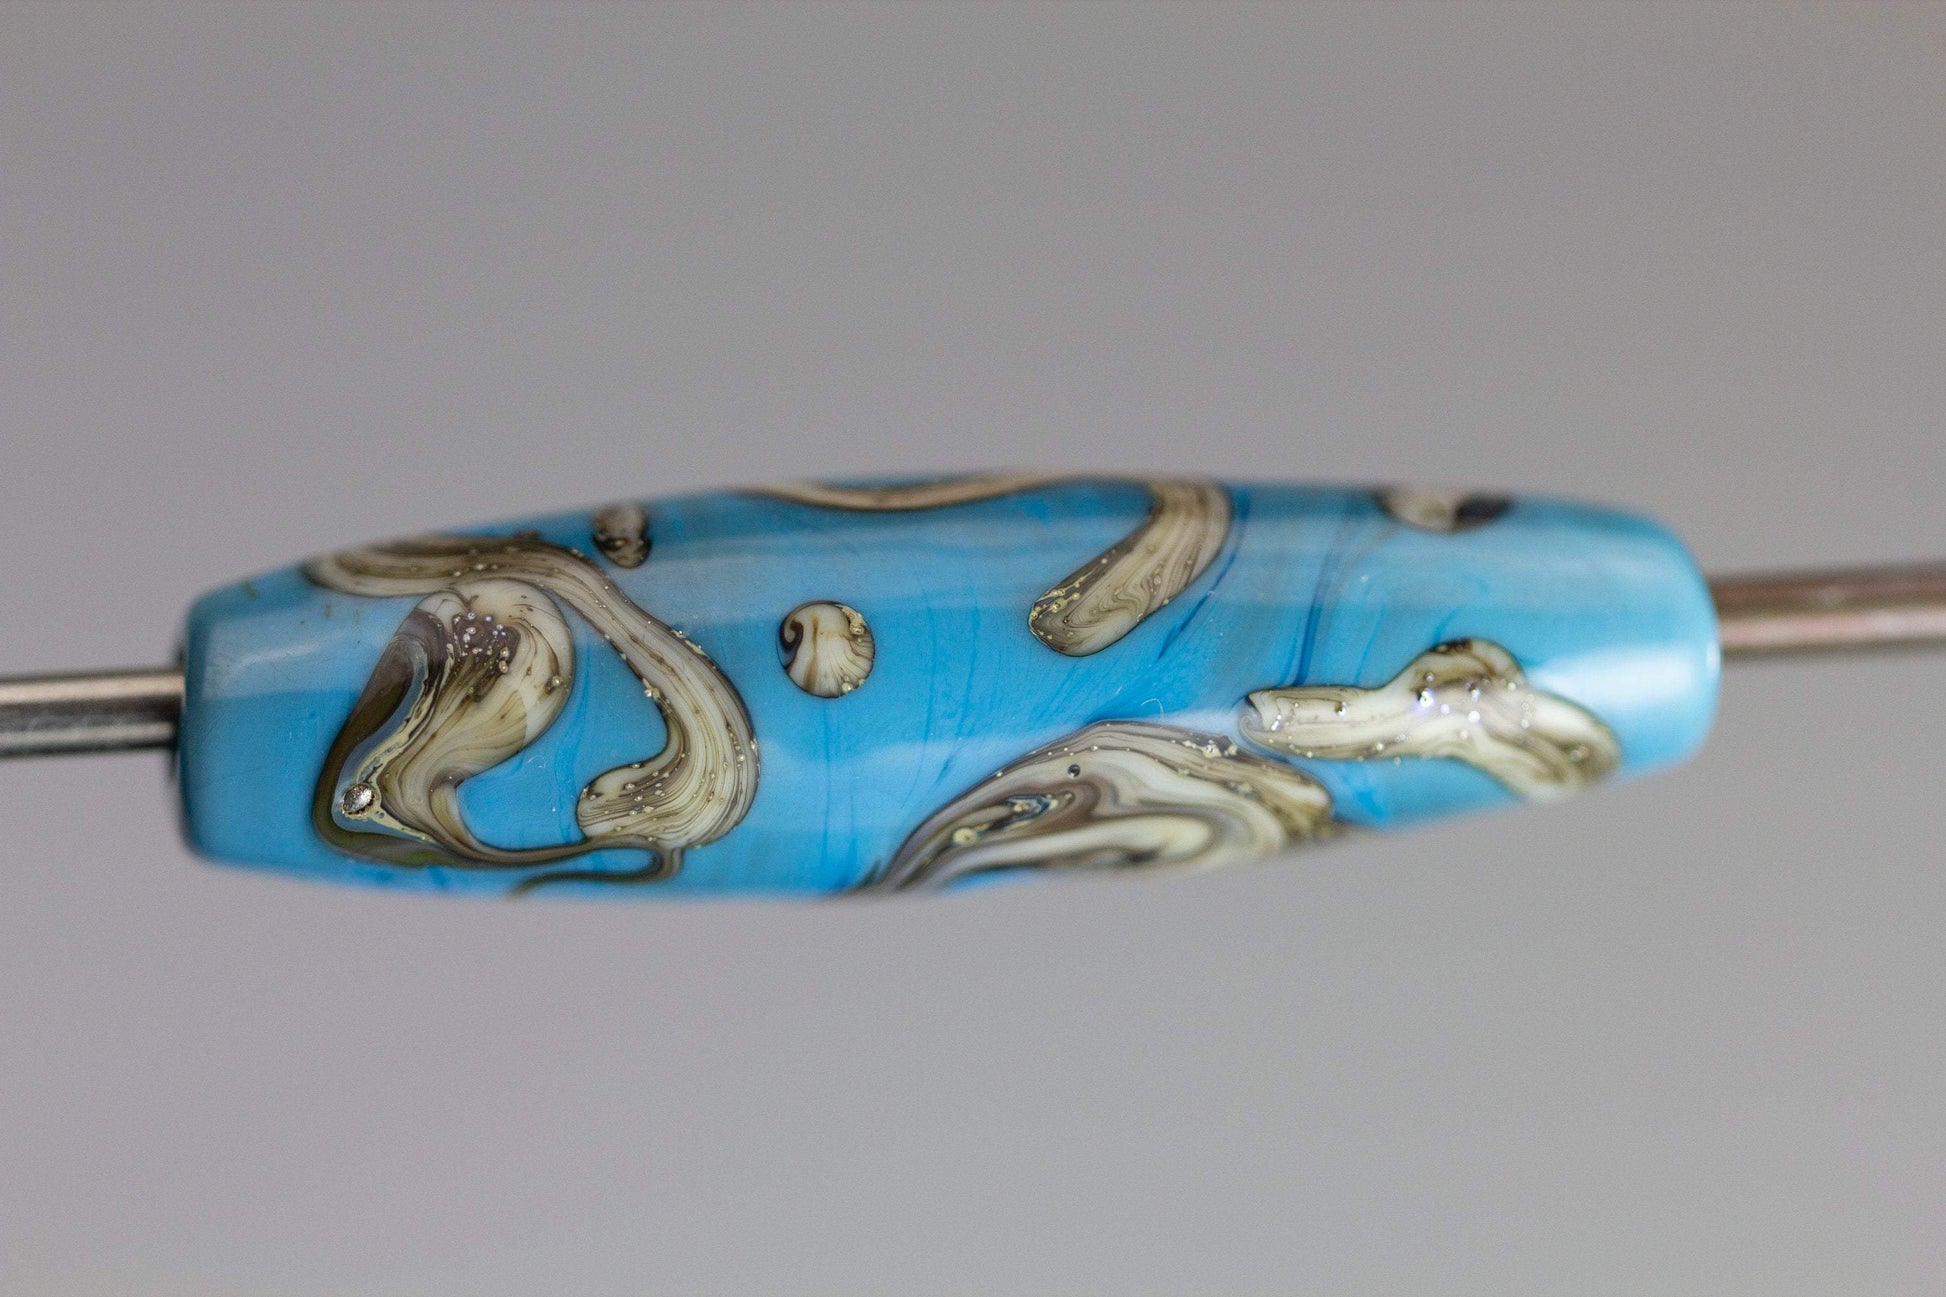 a handmade lampworked glass bead with silver and ivory swirls on a turquoise background